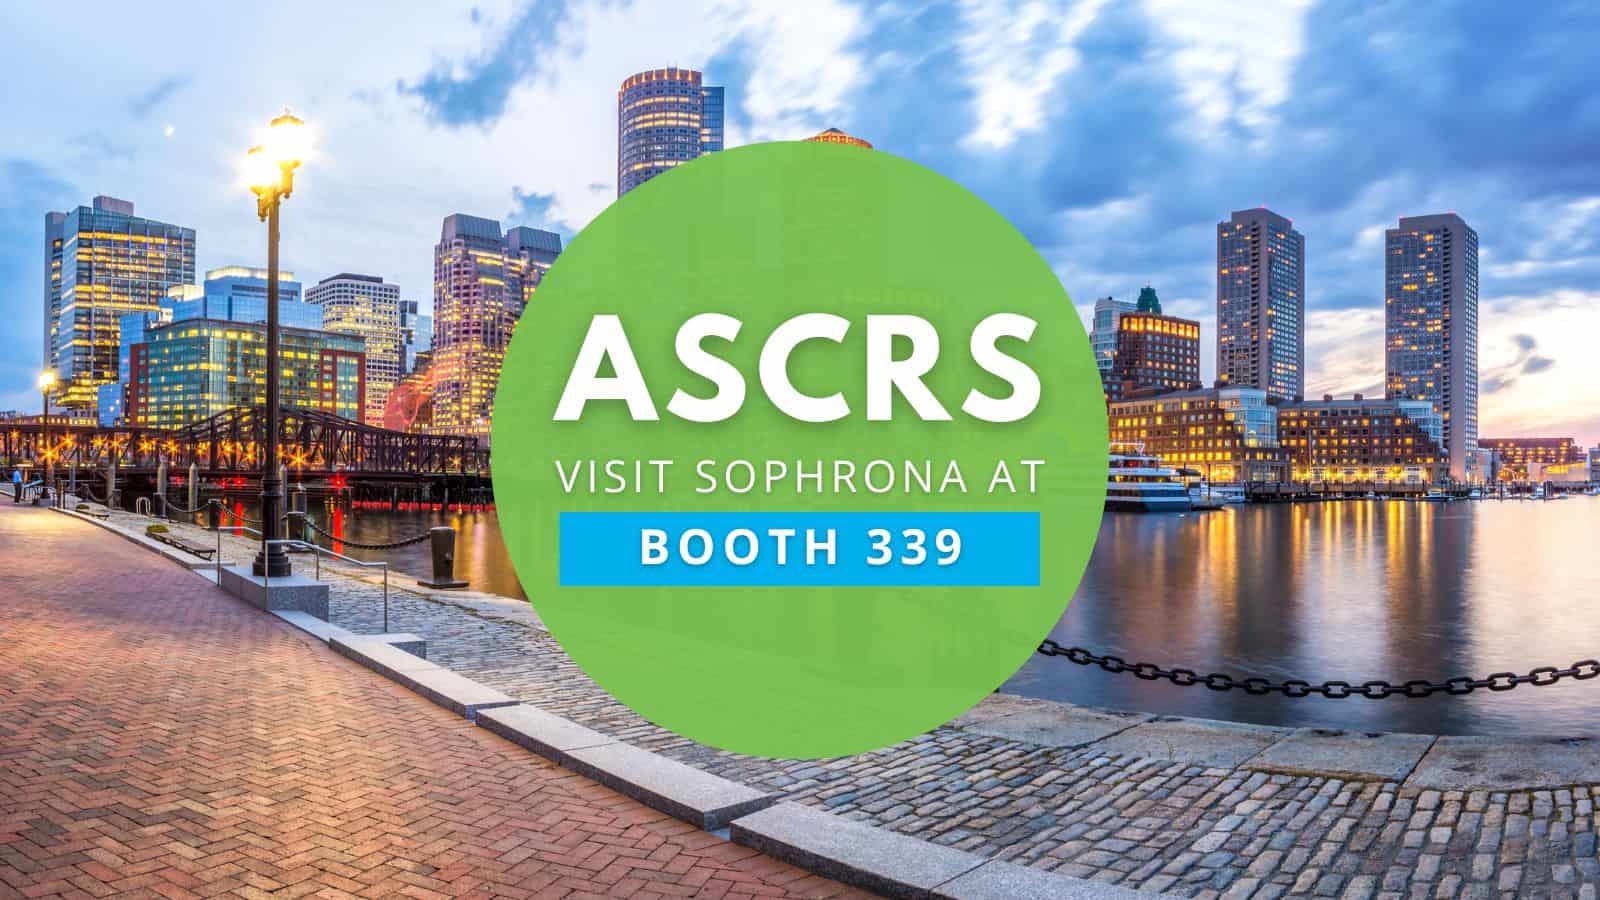 A photograph of the Harbor in Boston appears in the background. A green circle is in the center of the graphic with the text: ASCRS - Visit Sophrona at Booth 339.